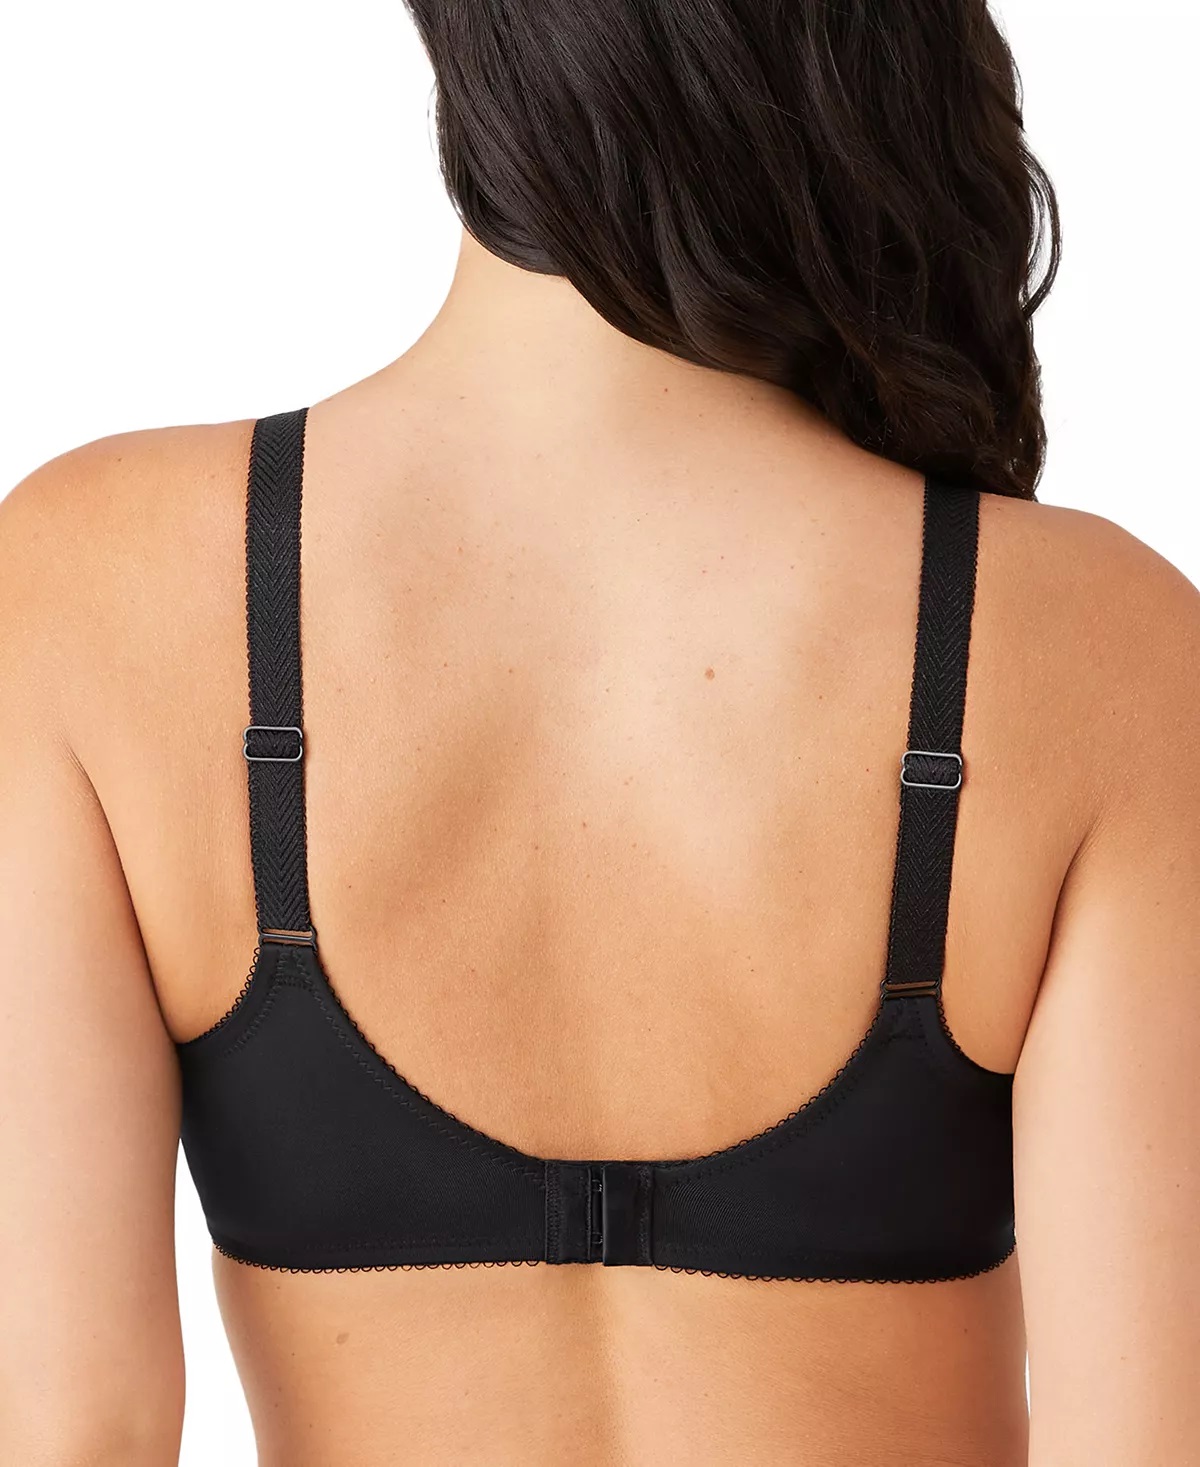 https://www.wacoalbras.com/resize/Shared/Images/Product/Wacoal-Slim-Silhouette-Minimizer-Style-857361-Up-to-H-Cup/857361-bk-Back.jpg?bw=1000&w=1000&bh=1000&h=1000